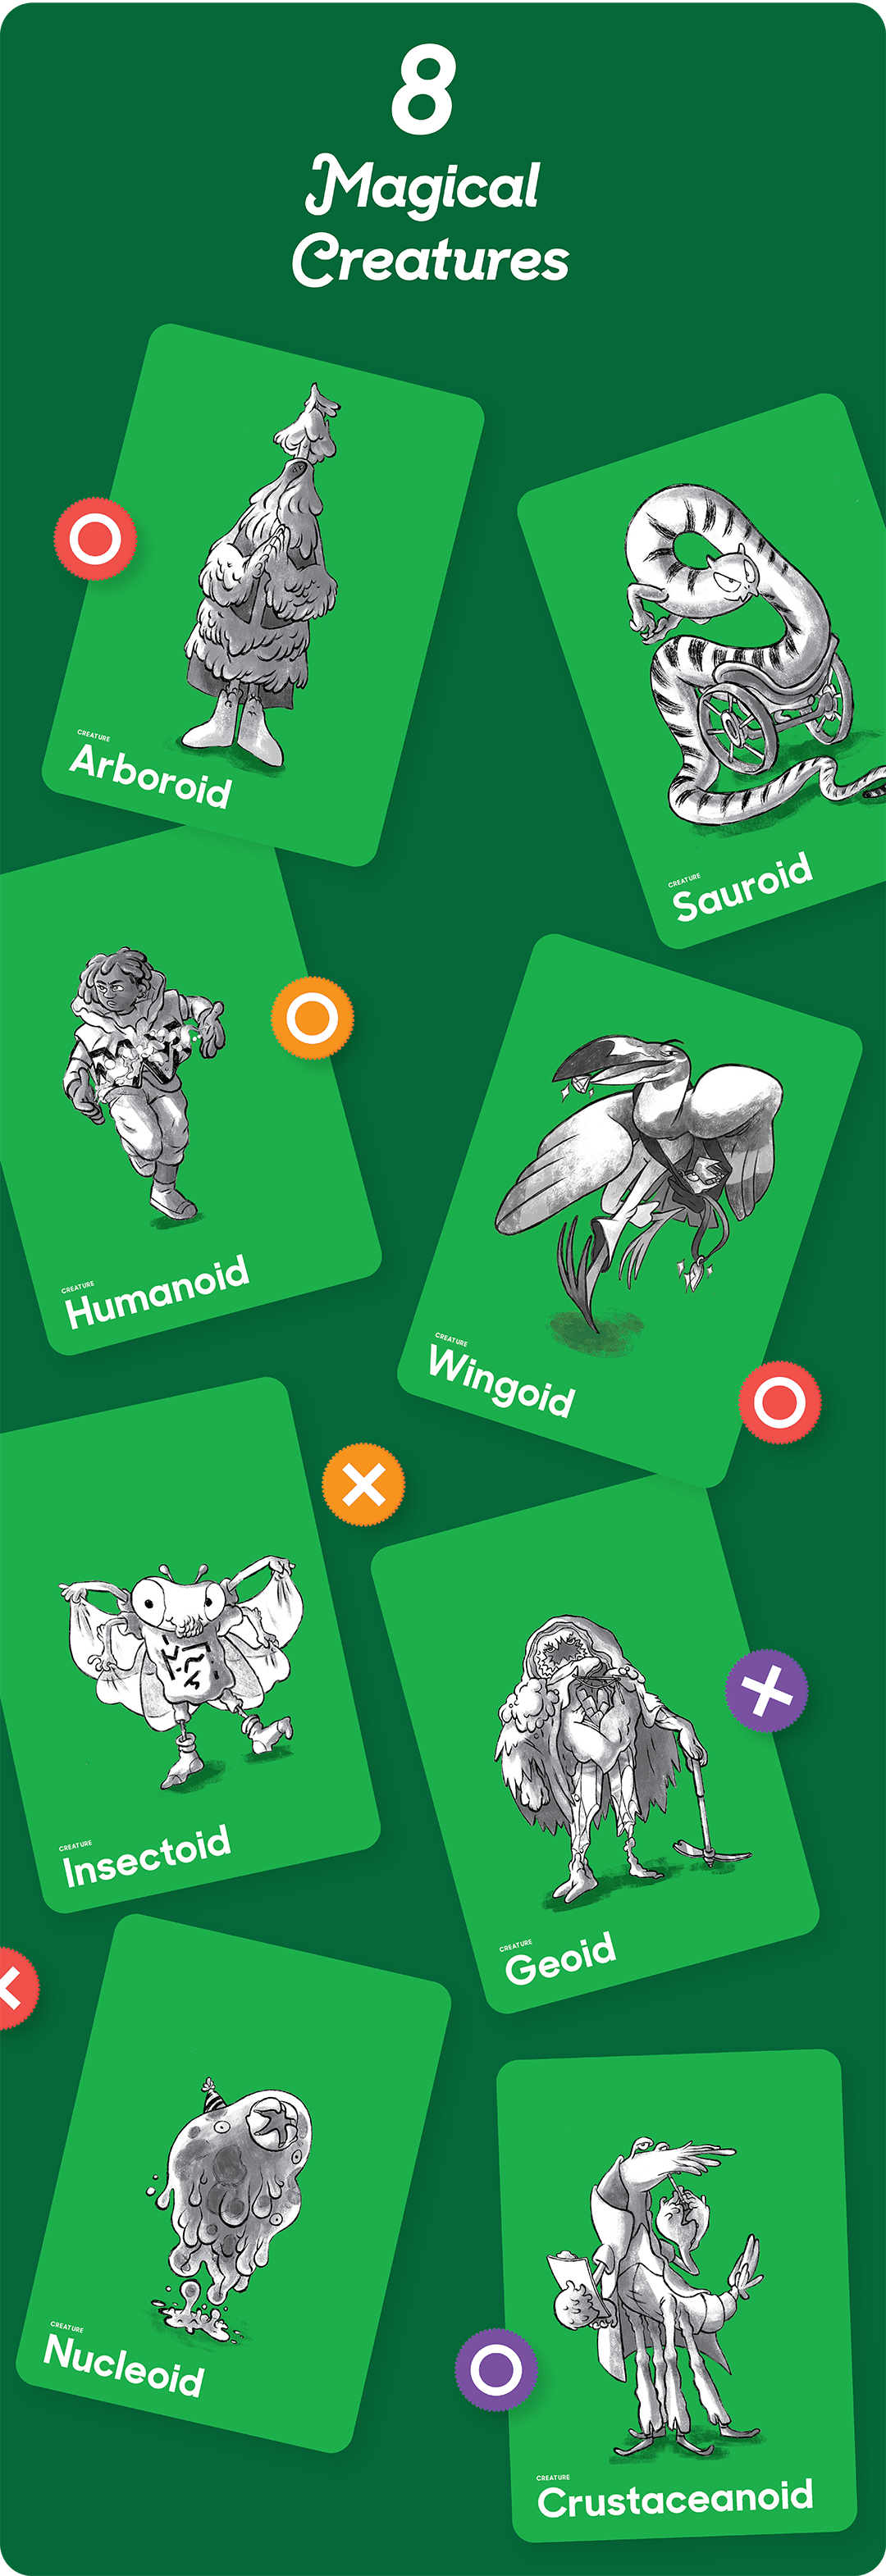 images of the eight creatures in fliptales, humanoid, arboroid, insectoid, sauroid, geoid, crustaceanoid, wingoid, and nucleoid